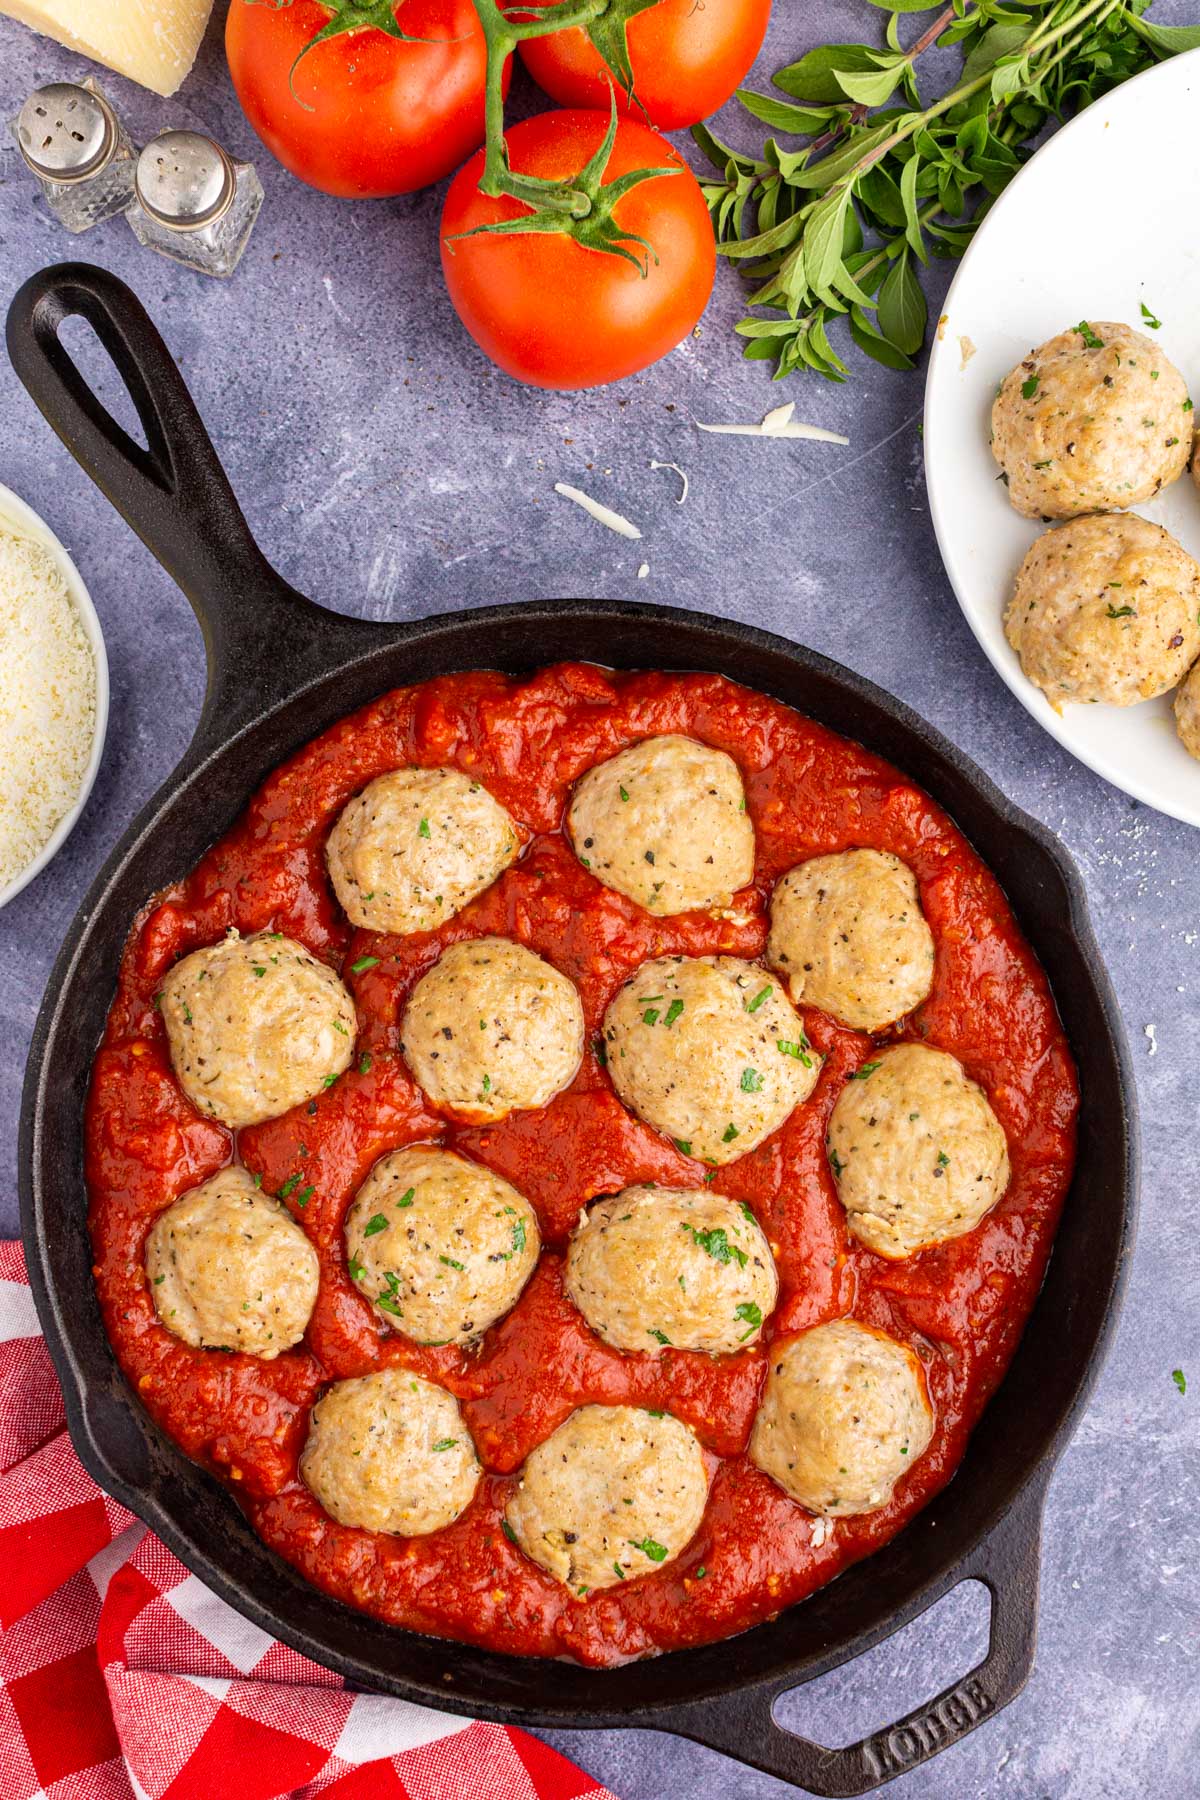 Meatballs nestled into the marinara sauce in a skillet.